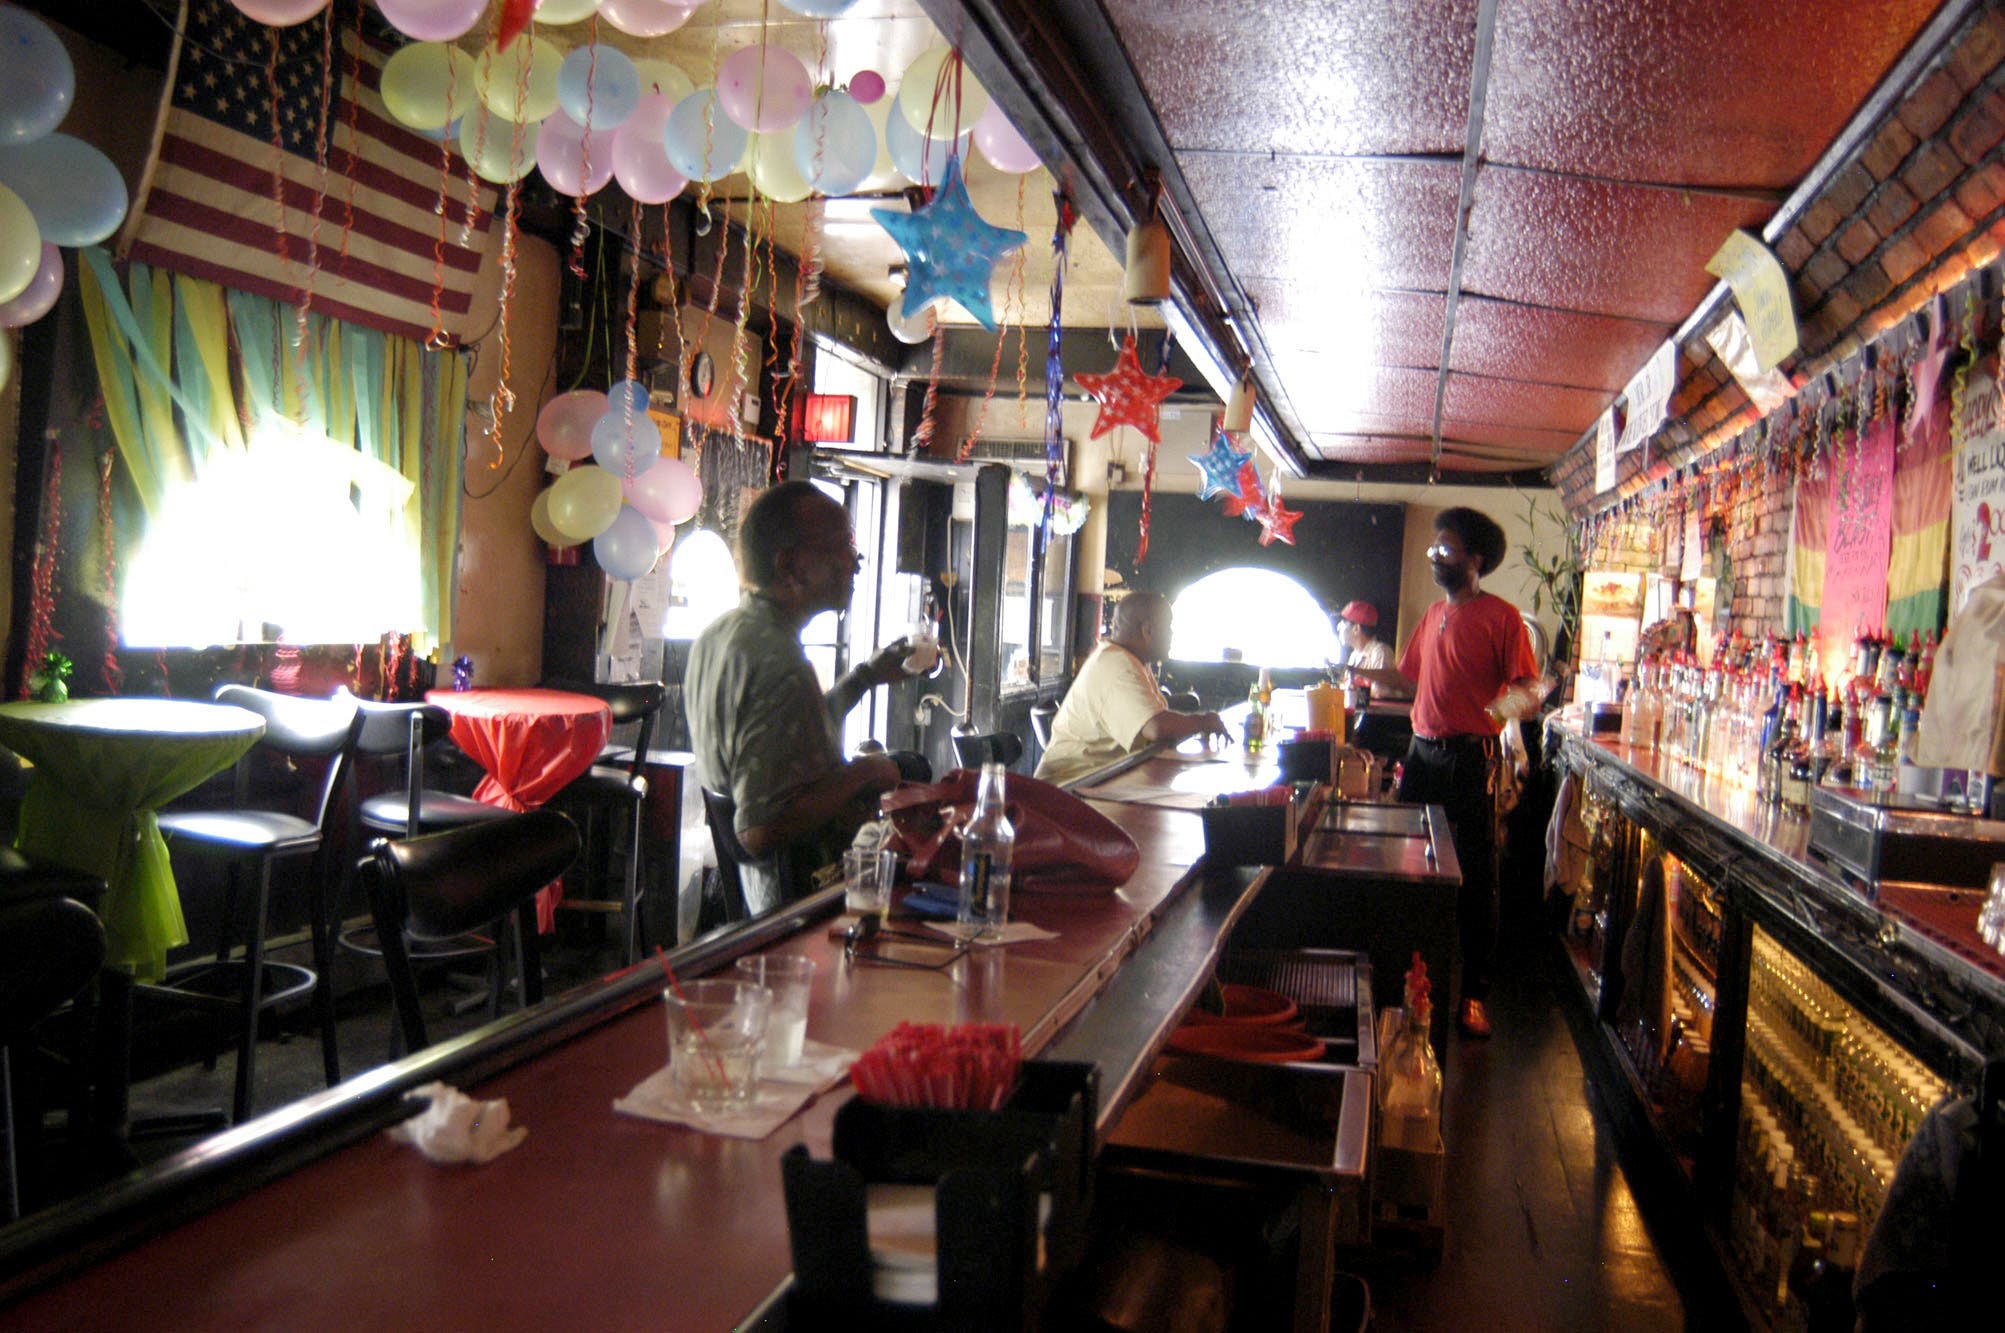 A bar with three customres and a bartender in red shirt with afro hairstyle. Colorful balloons fill the ceiling. Read acoustic tile is above the bar area. Daylight is seen through the windows.